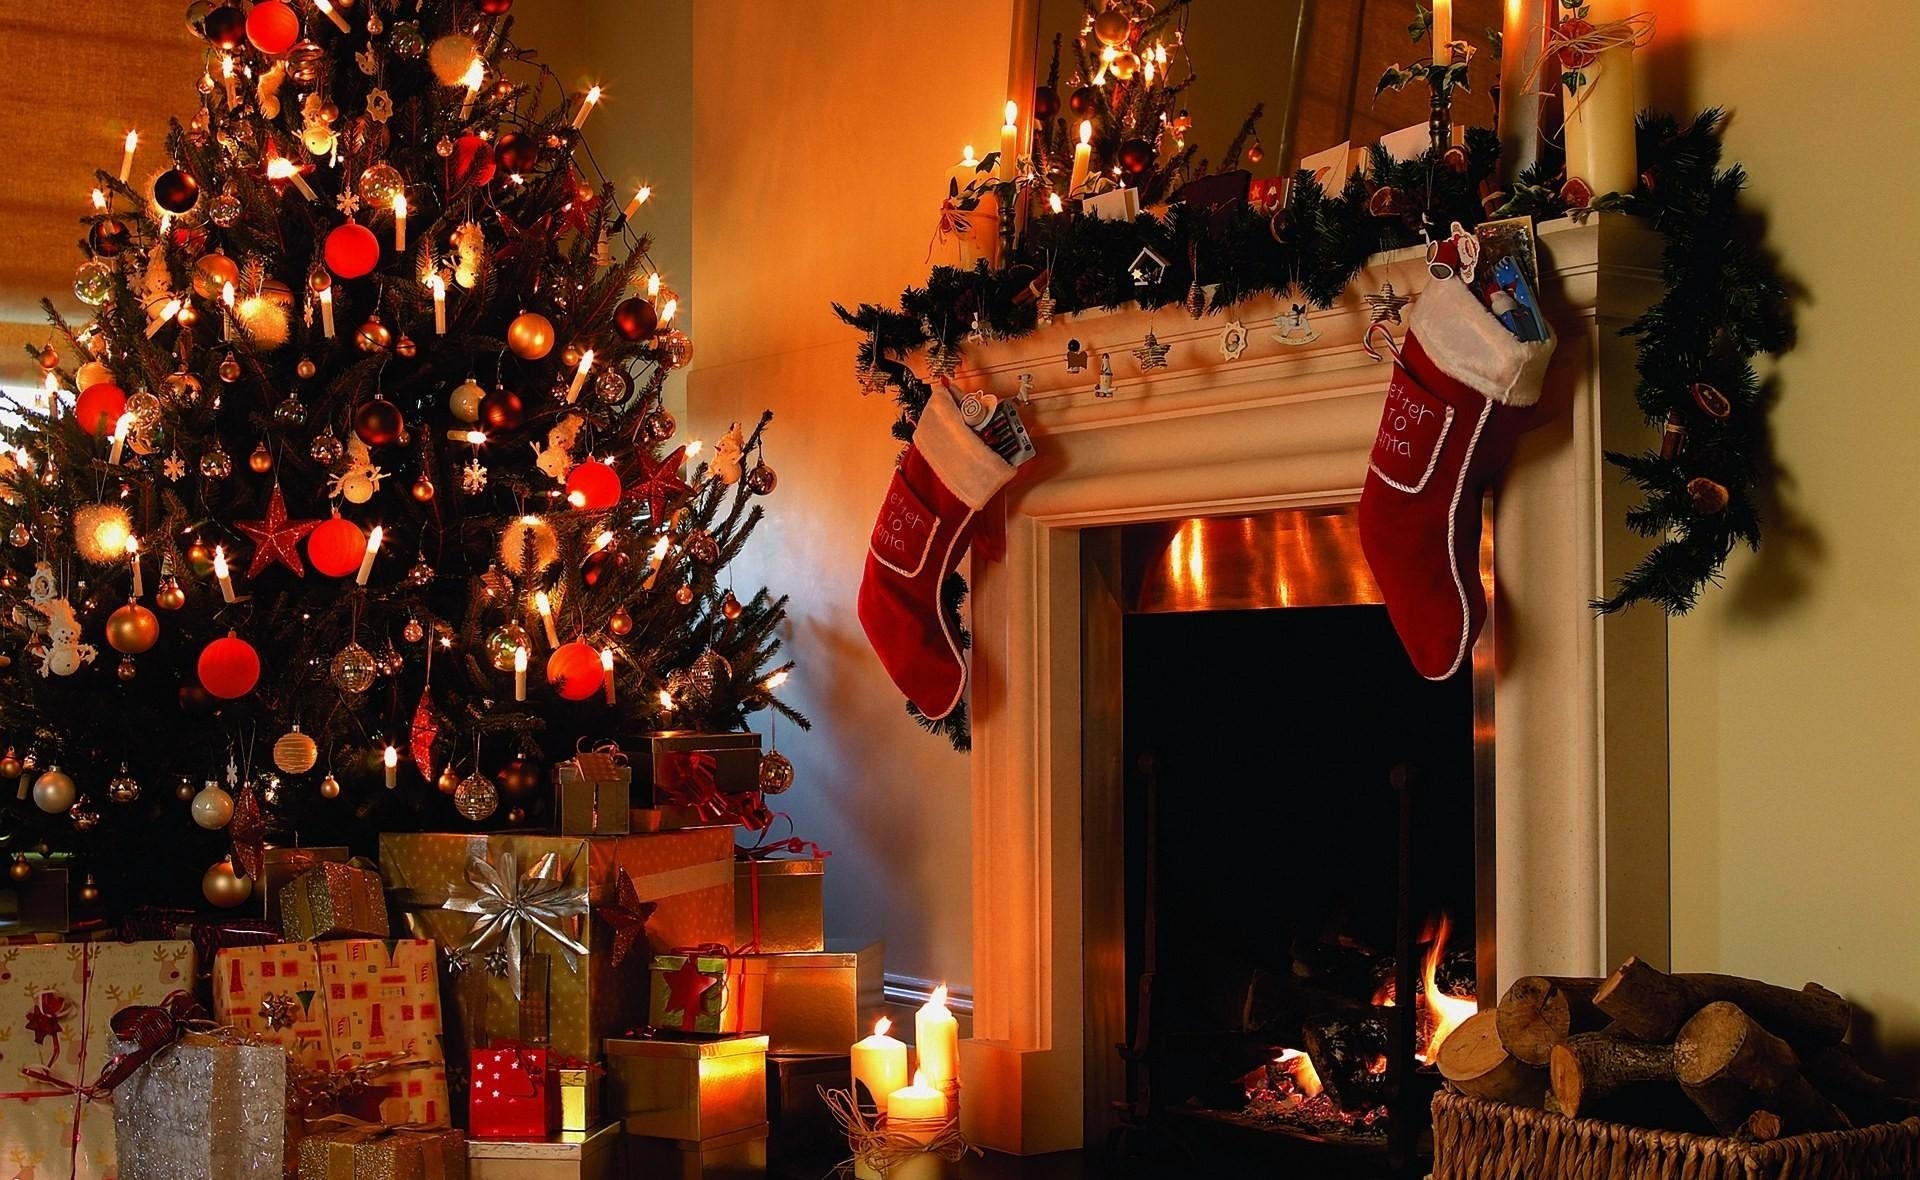 http://www.adehansa.ee/wp-content/uploads/2013/12/christmas_tree_gifts_candles_fireplace_firewood_stockings_christmas_holiday_41413_1920x1180.jpg